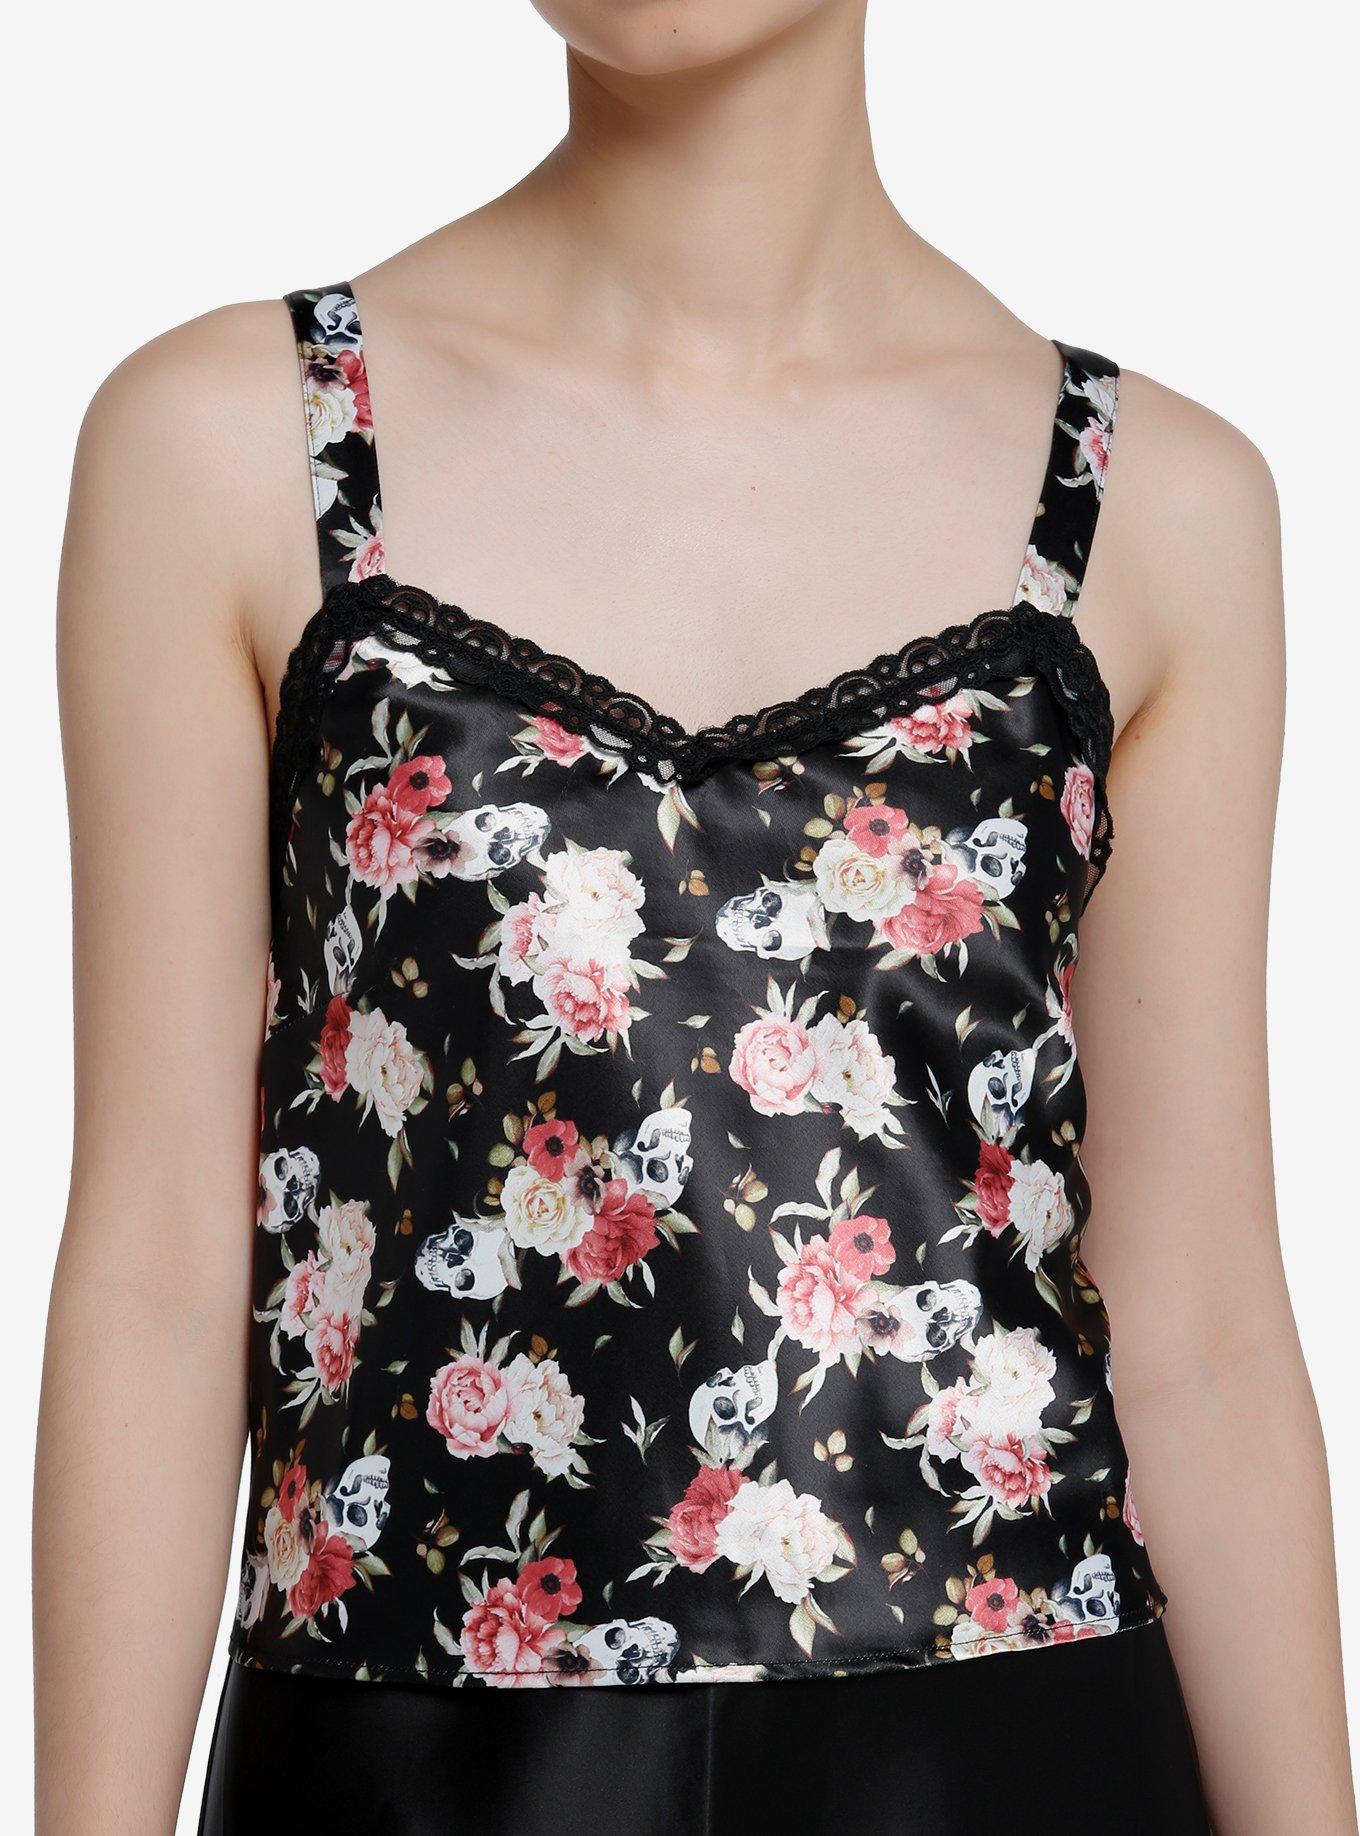 Skull & Flowers Satin & Lace Girls Strappy Tank Top